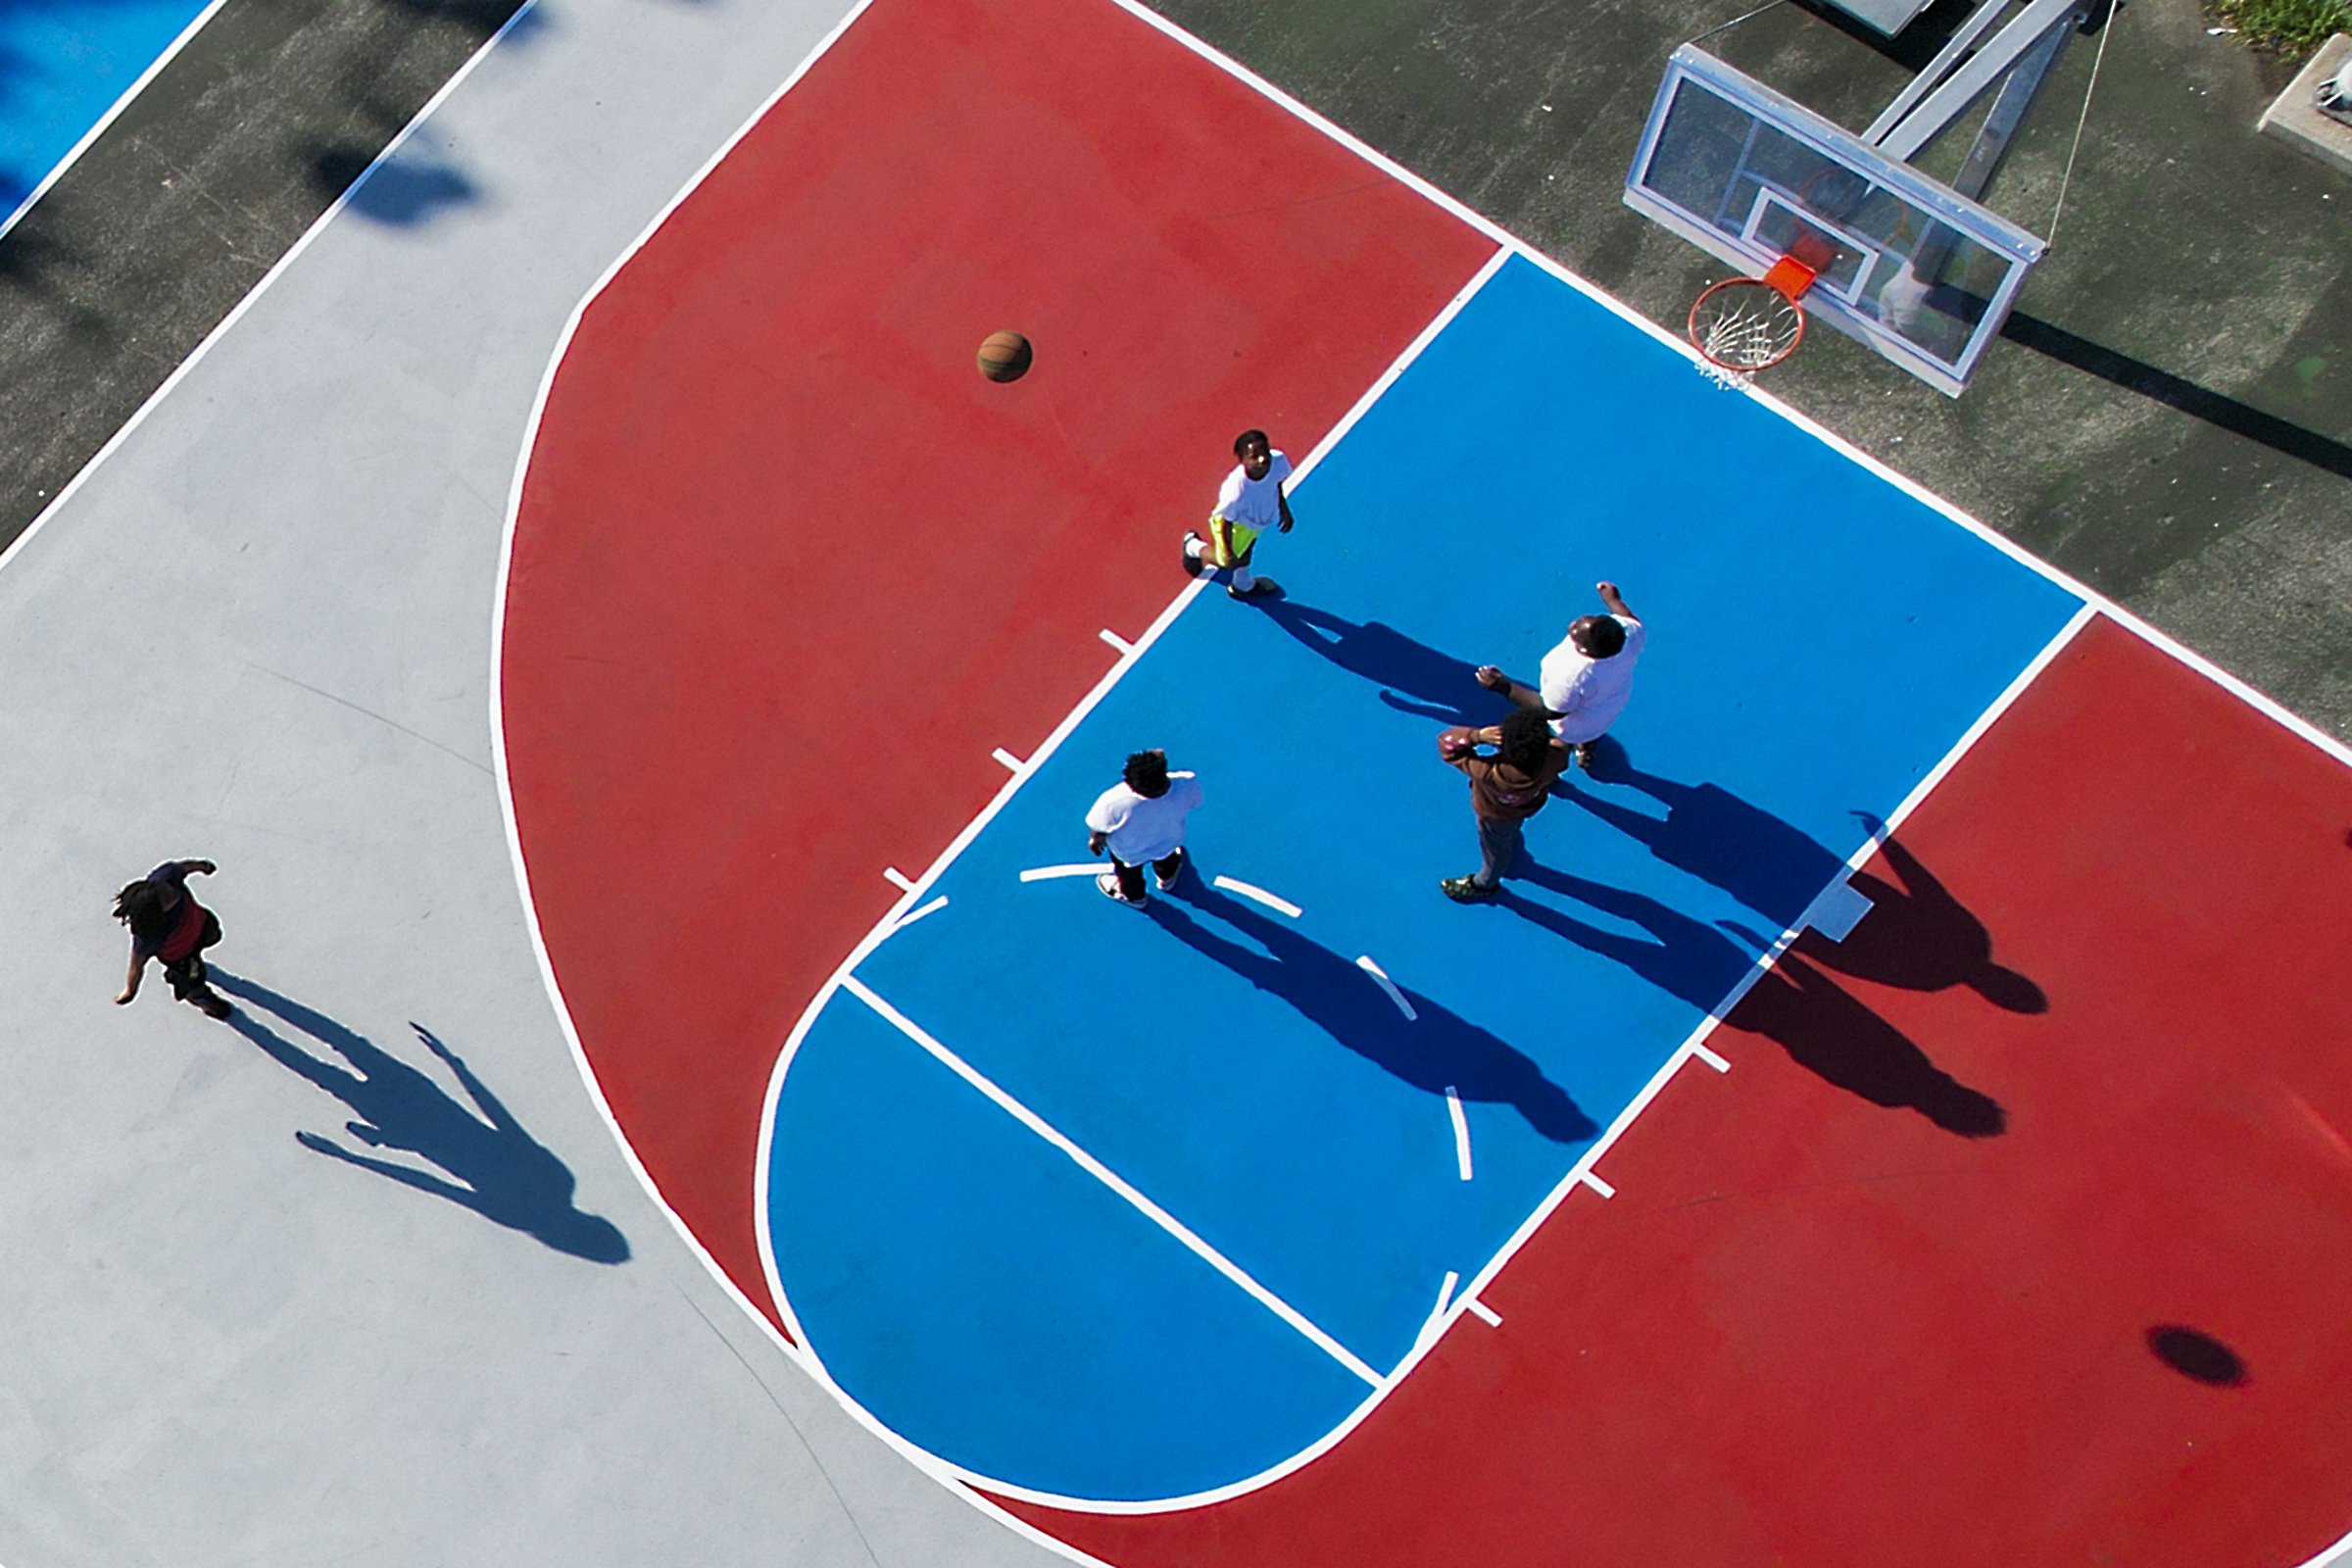  Teens play on the renovated basketball courts at the Hank Gathers Recreation Center in North Philadelphia on July 21, 2022. 